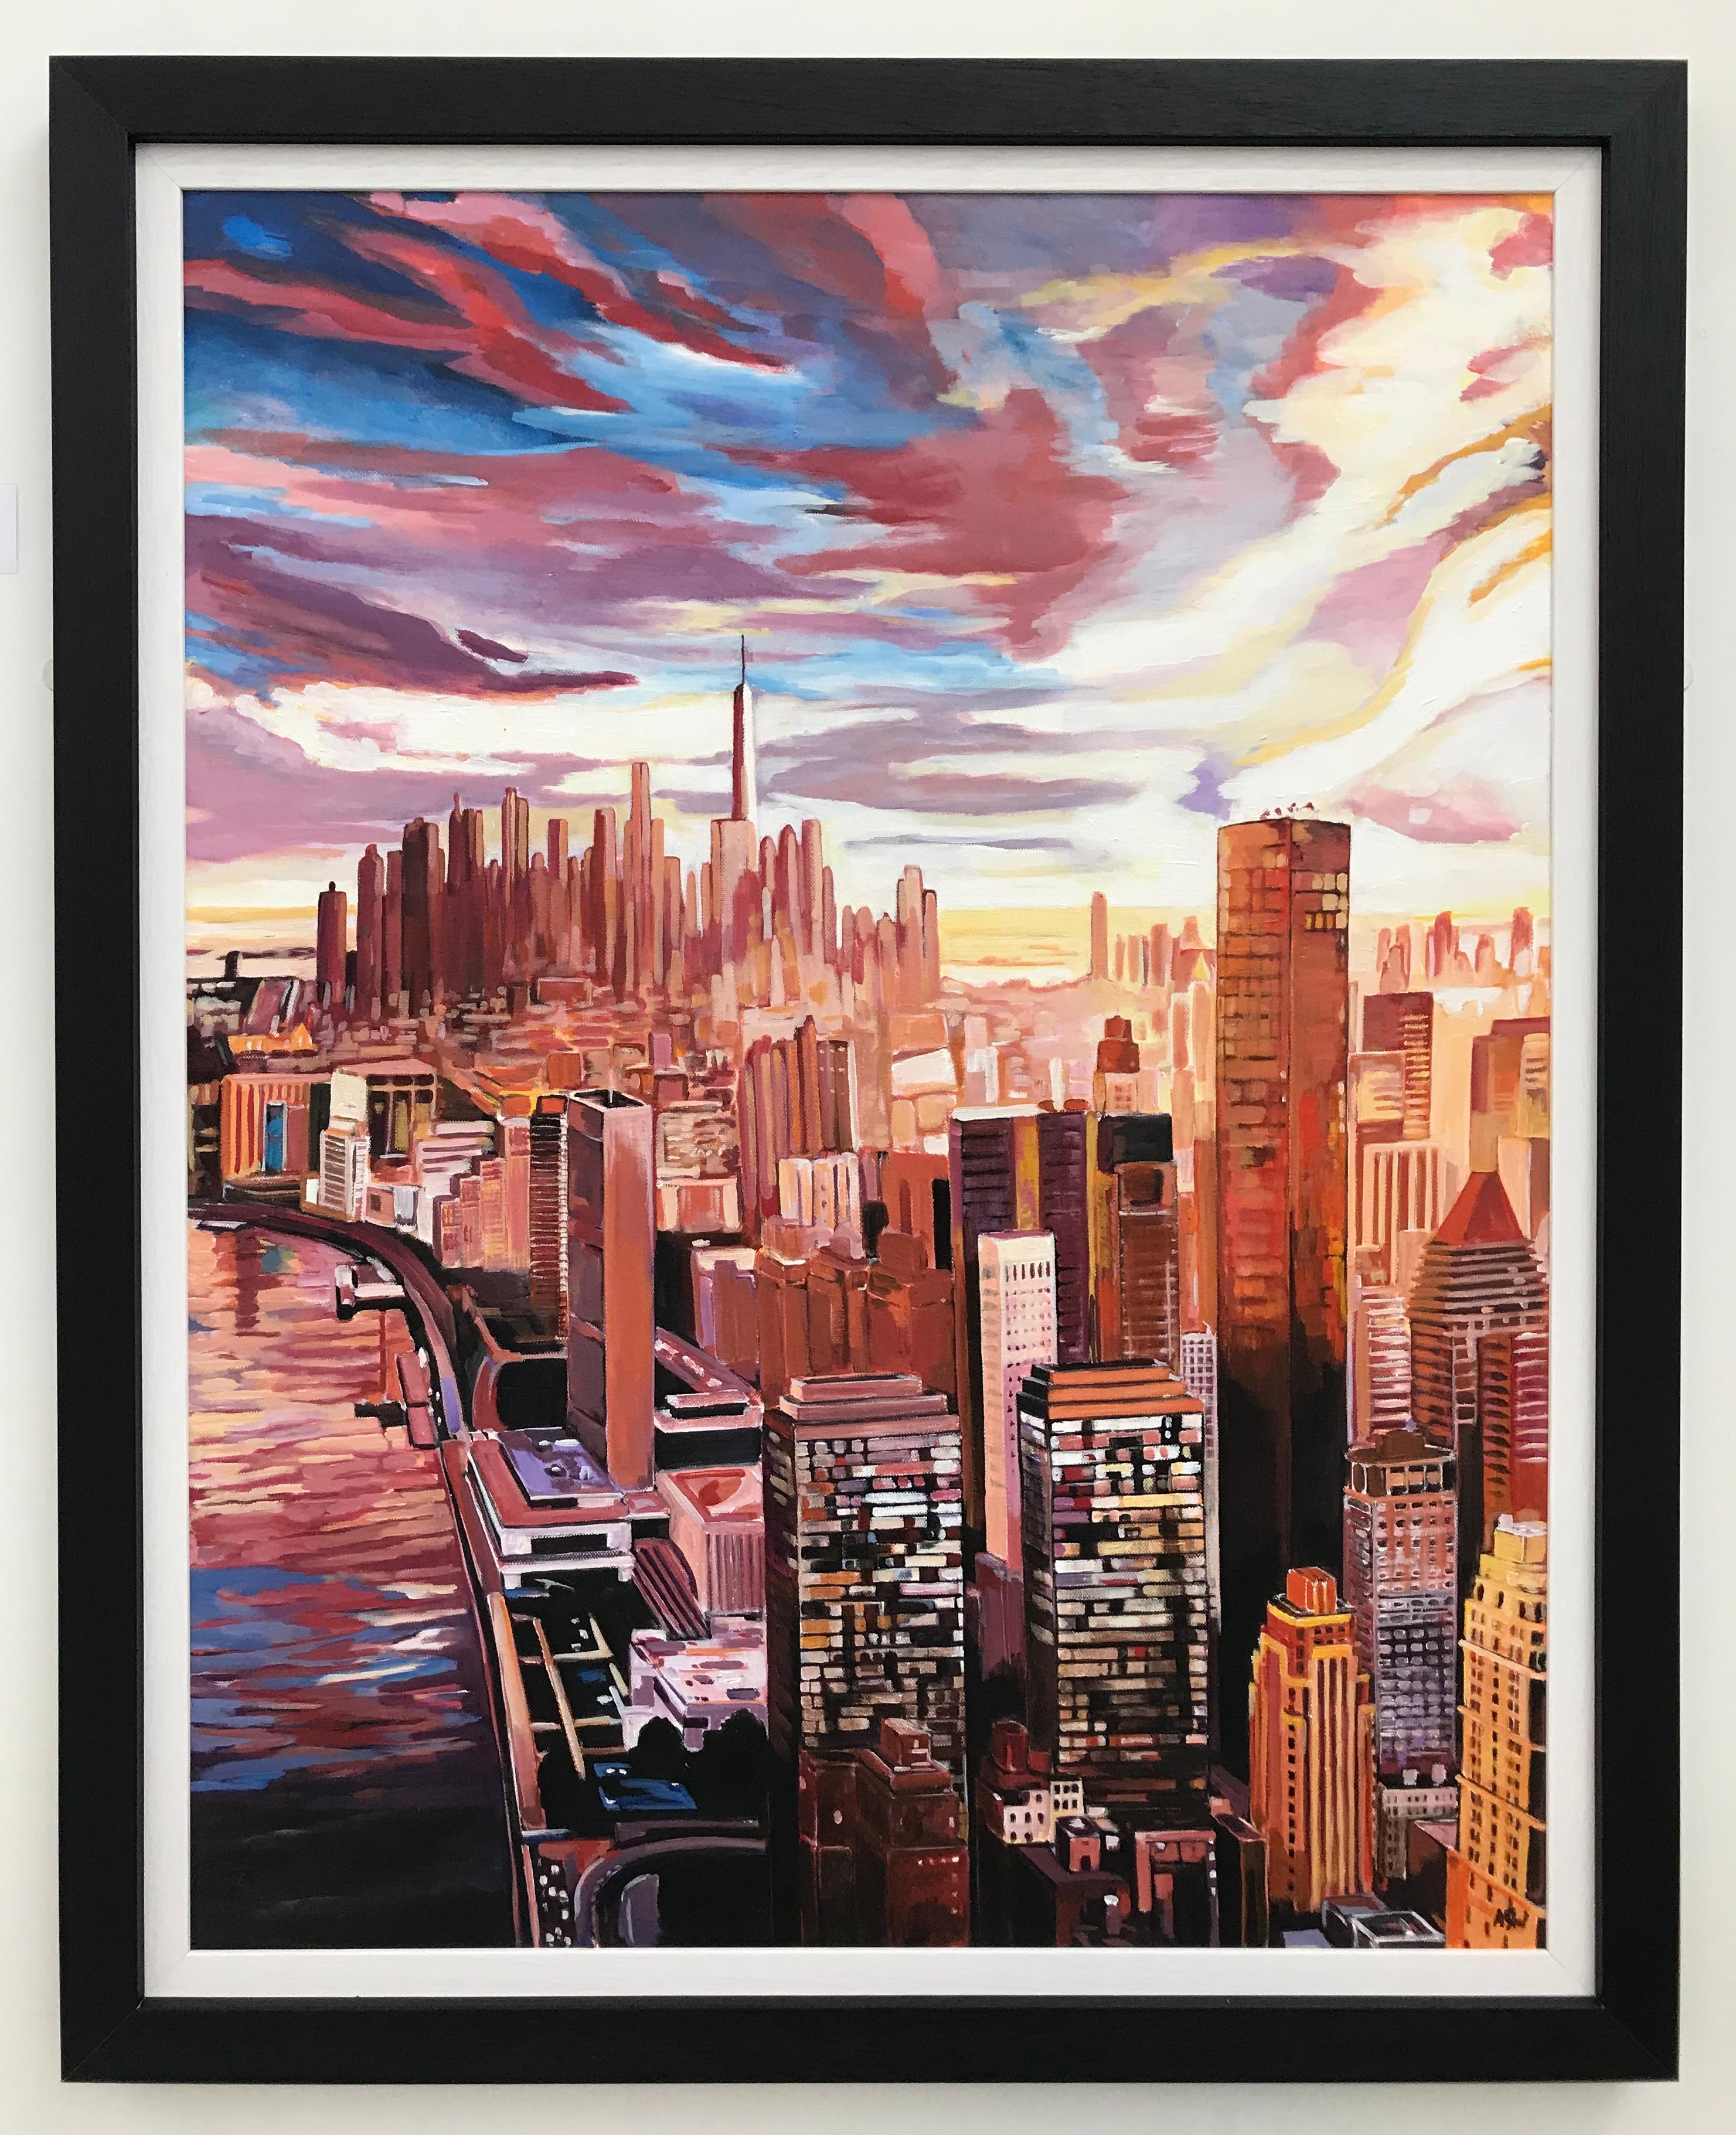 Painting of an Aerial View of Manhattan Island New York City by English Artist - Brown Figurative Painting by Angela Wakefield